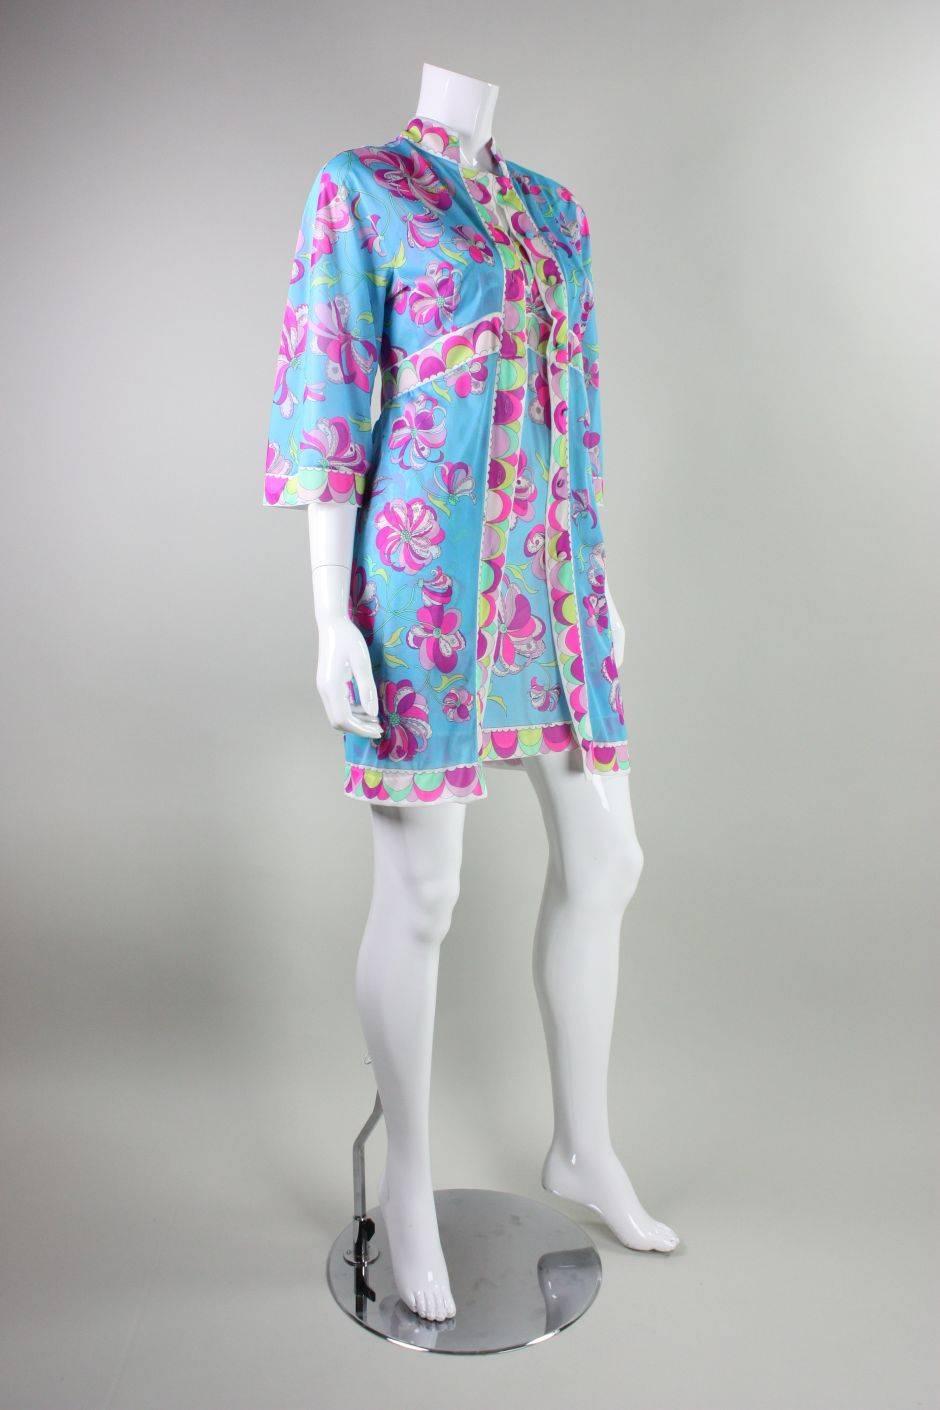 1960s nightgown